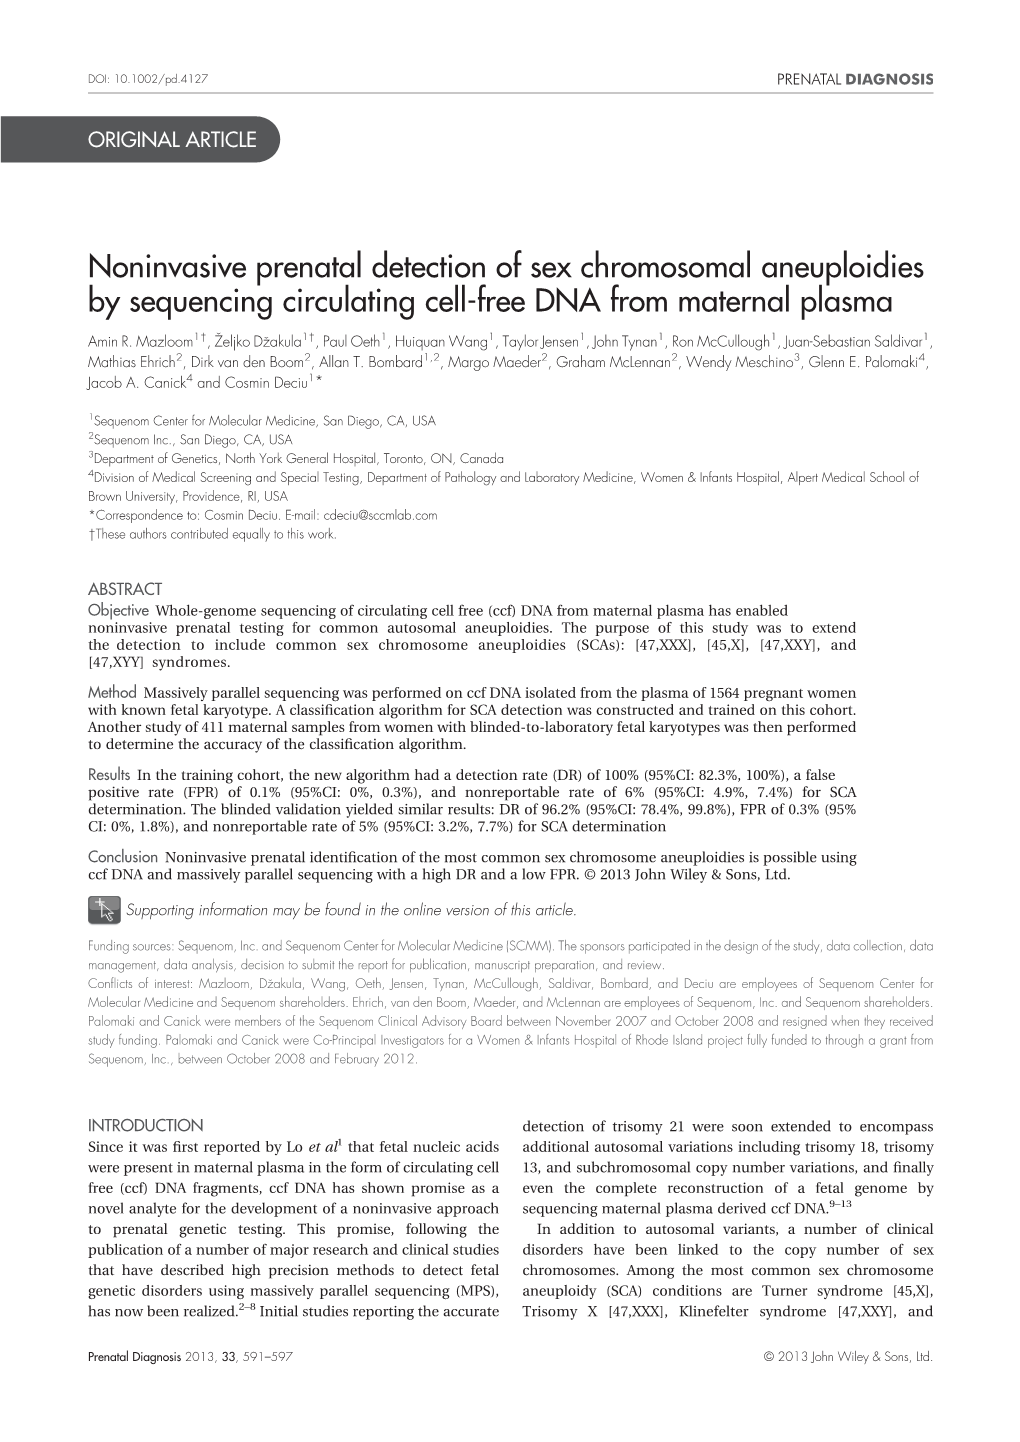 Noninvasive Prenatal Detection of Sex Chromosomal Aneuploidies by Sequencing Circulating Cell-Free DNA from Maternal Plasma †  † Amin R